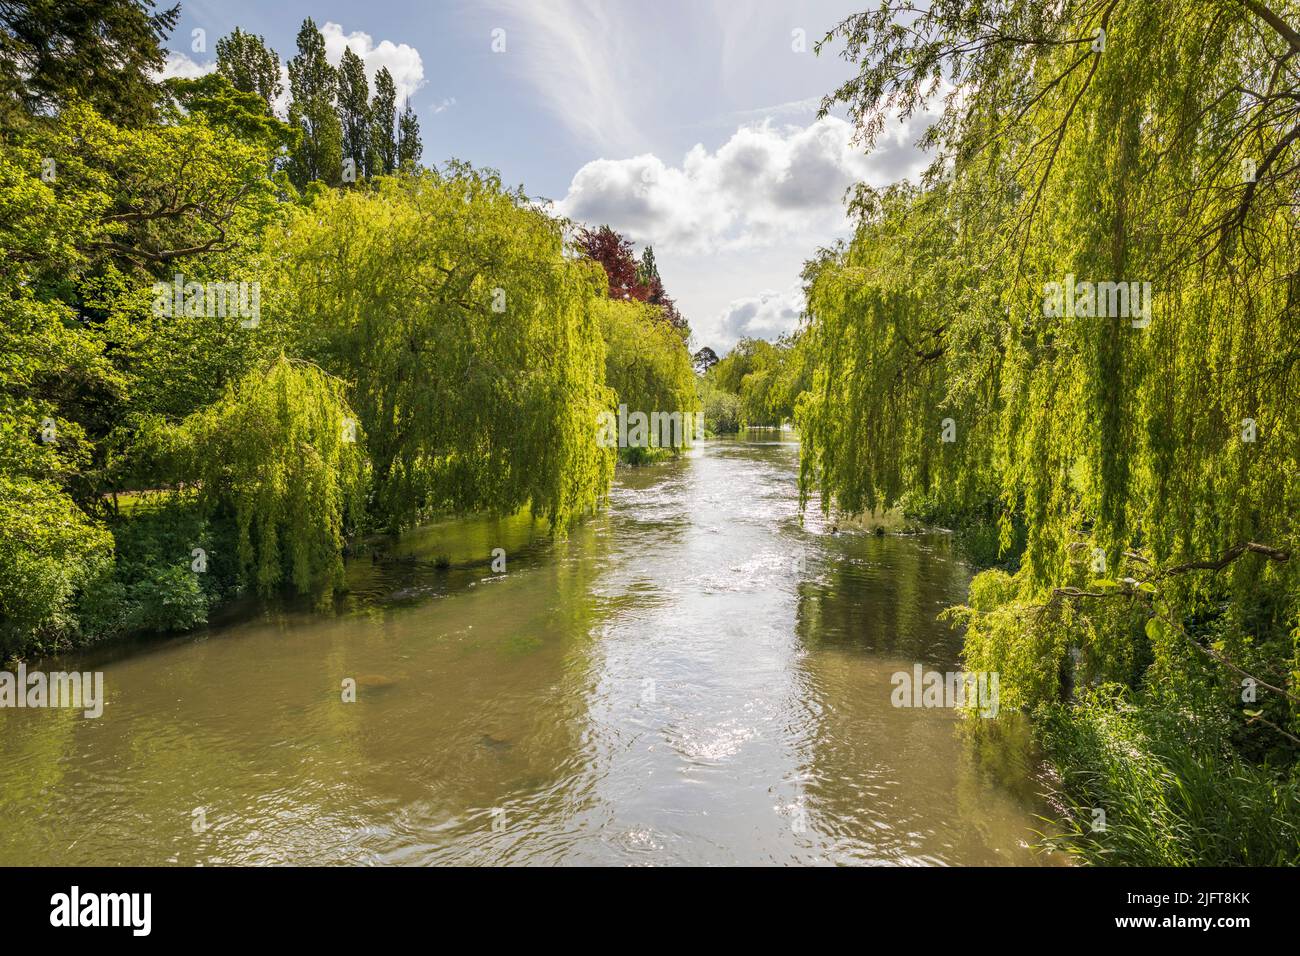 The River Kennet lined with weeping willow trees at Marsh Benham, Newbury, Berkshire, England, United Kingdom, Europe Stock Photo